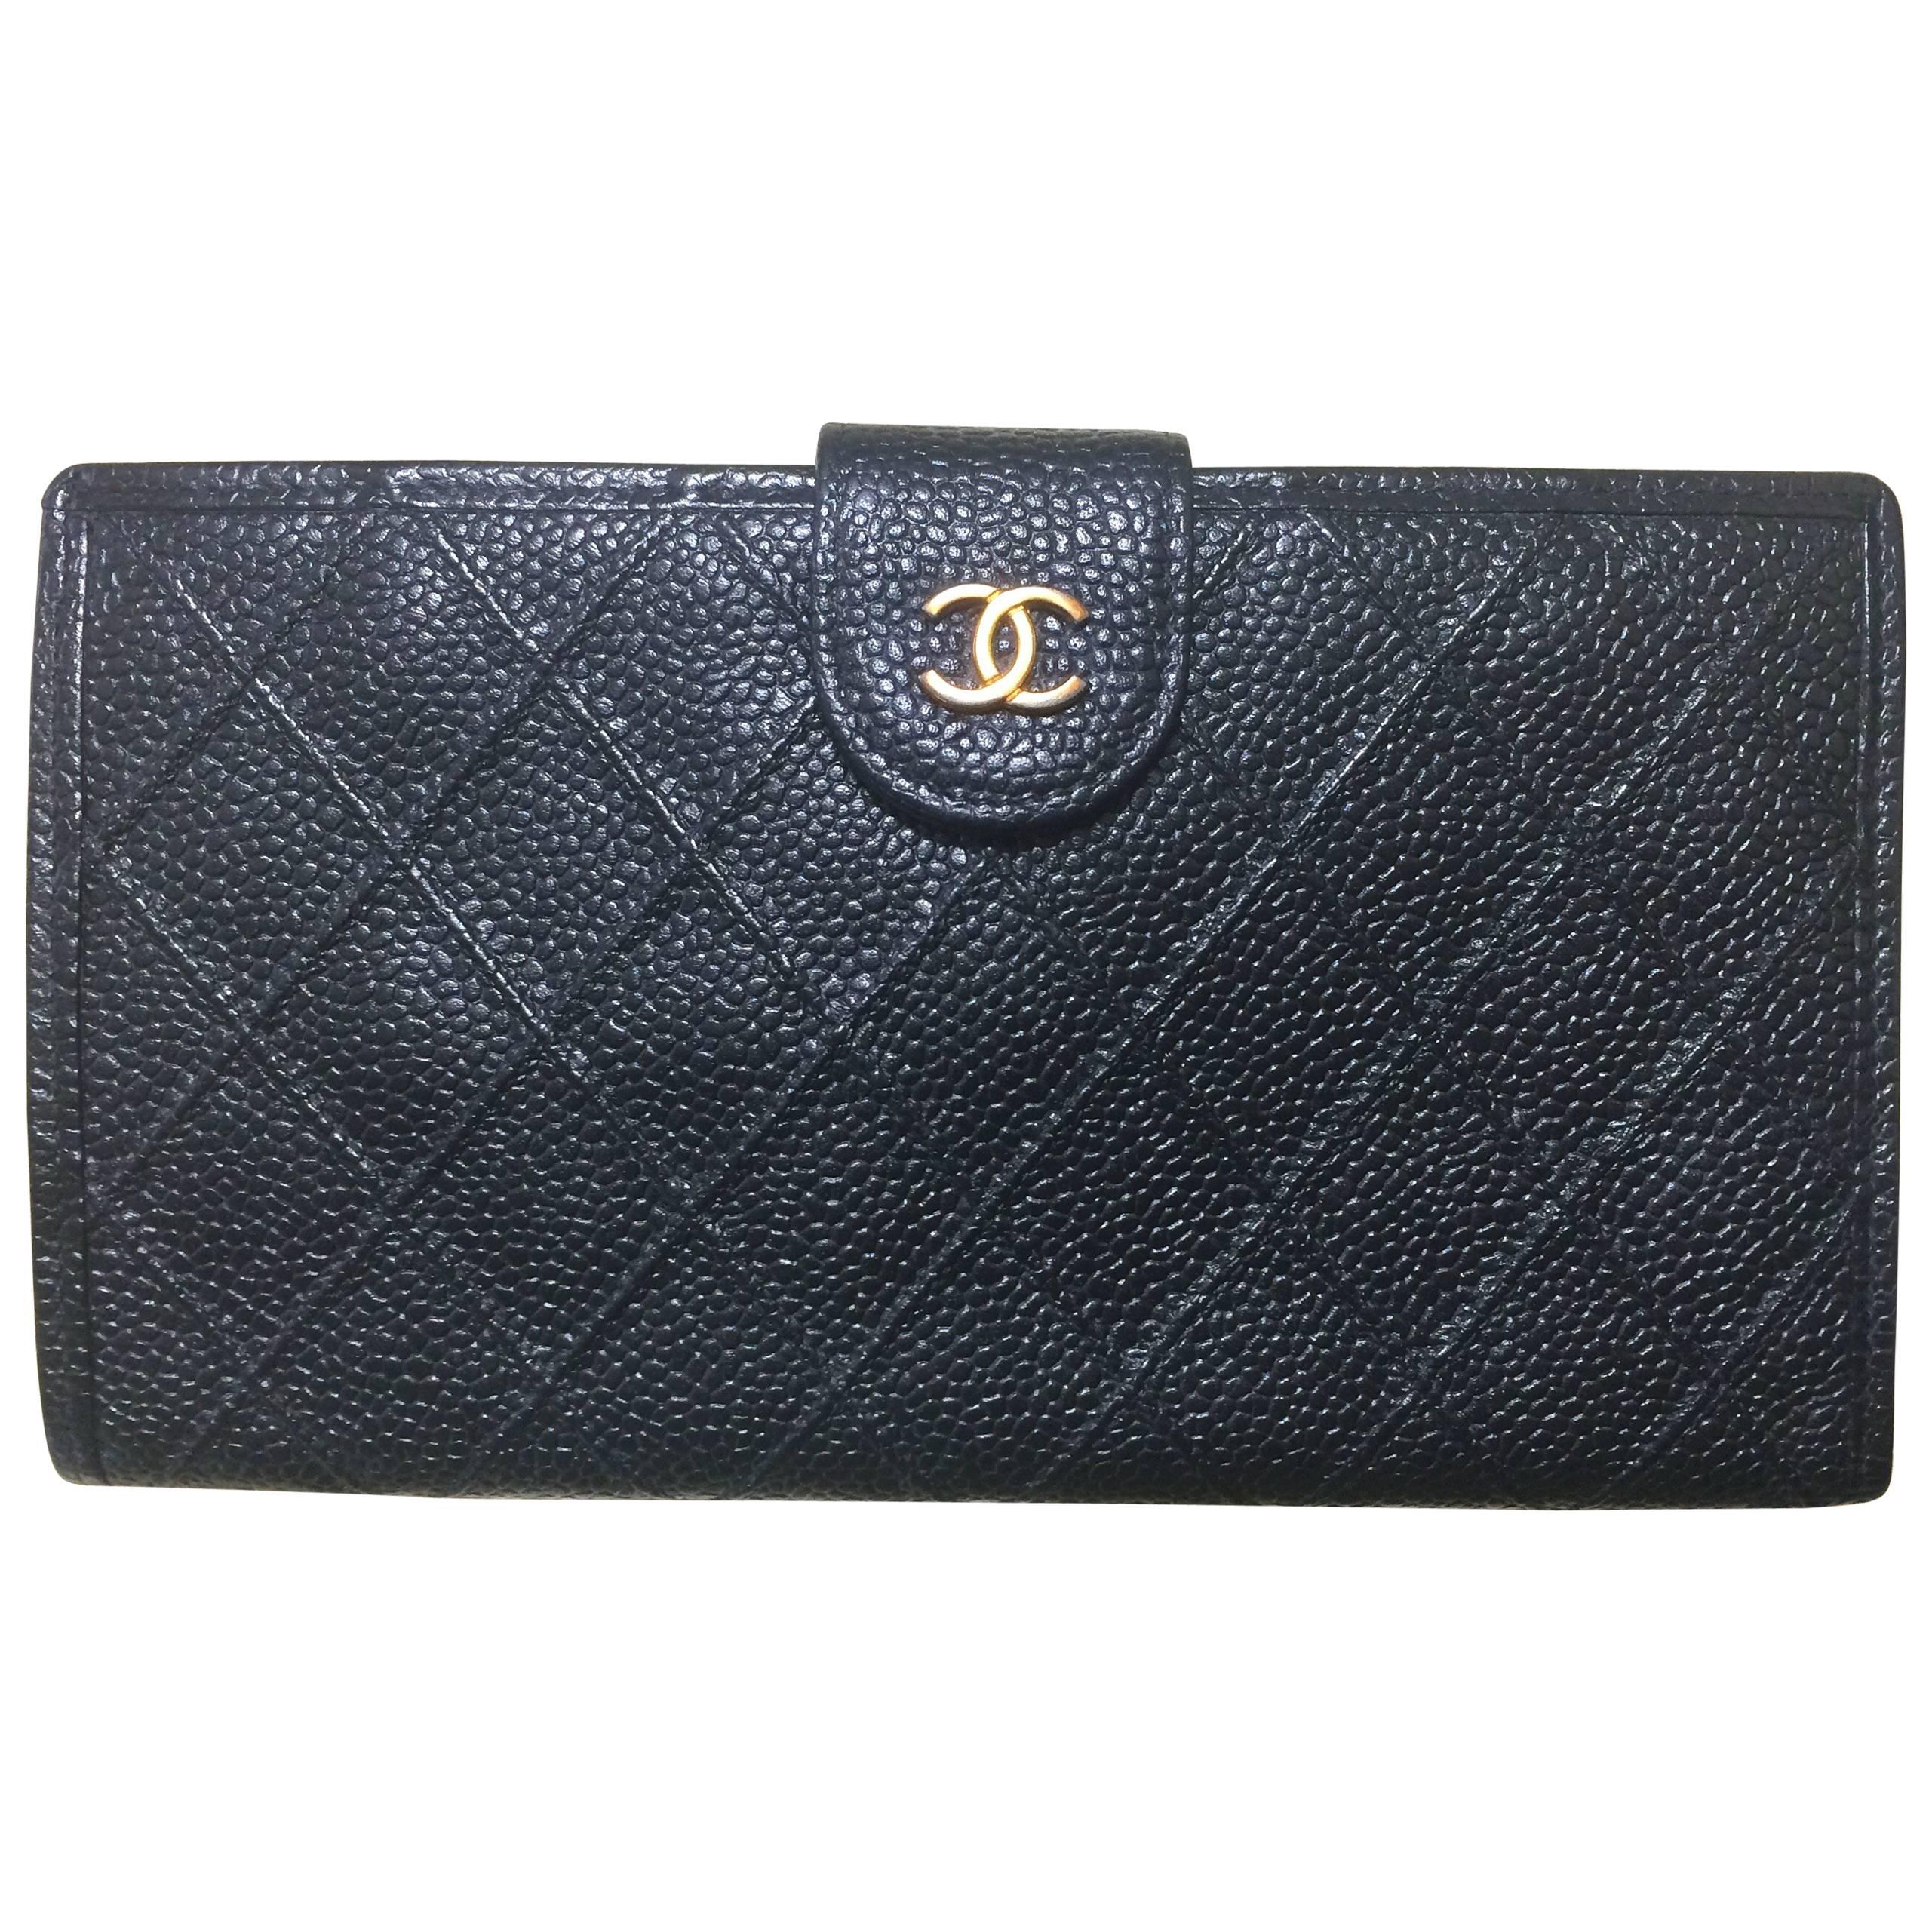 Vintage CHANEL black caviar leather wallet with stitches and gold tone CC motif.